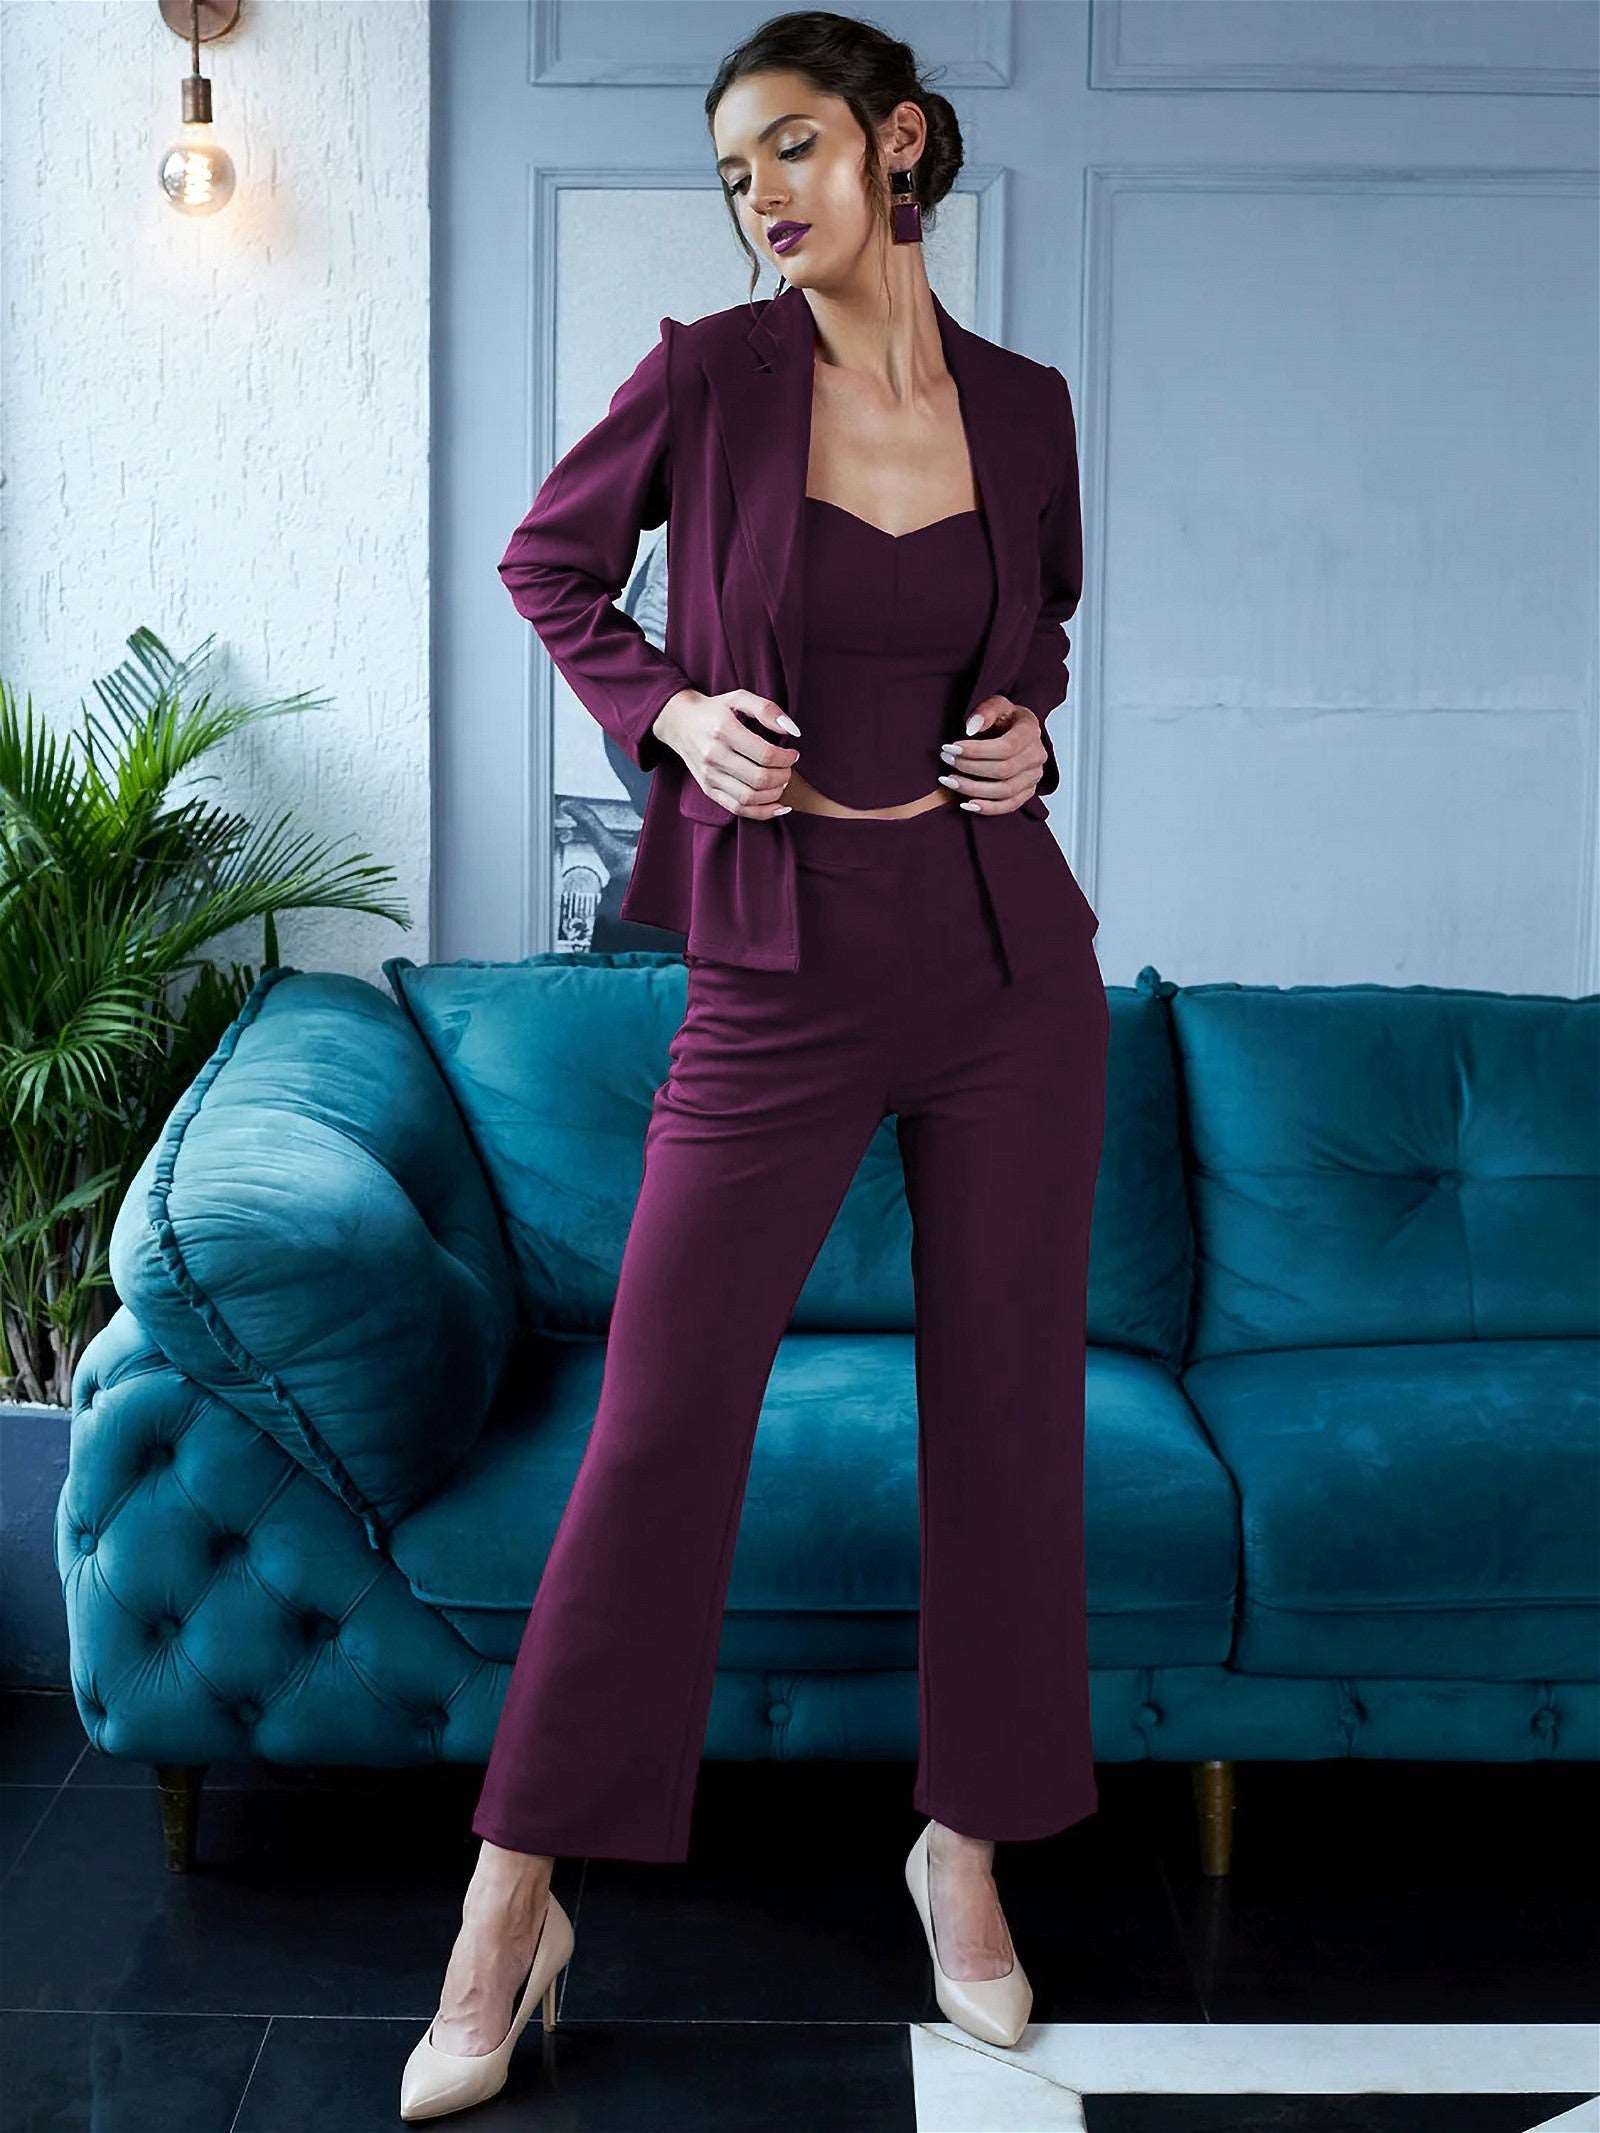 The model in the image is wearing Amethyst - 3 Piece Purple Co ord Set from Alice Milan. Crafted with the finest materials and impeccable attention to detail, the Formal Suit looks premium, trendy, luxurious and offers unparalleled comfort. It’s a perfect clothing option for loungewear, resort wear, party wear or for an airport look. The woman in the image looks happy, and confident with her style statement putting a happy smile on her face.